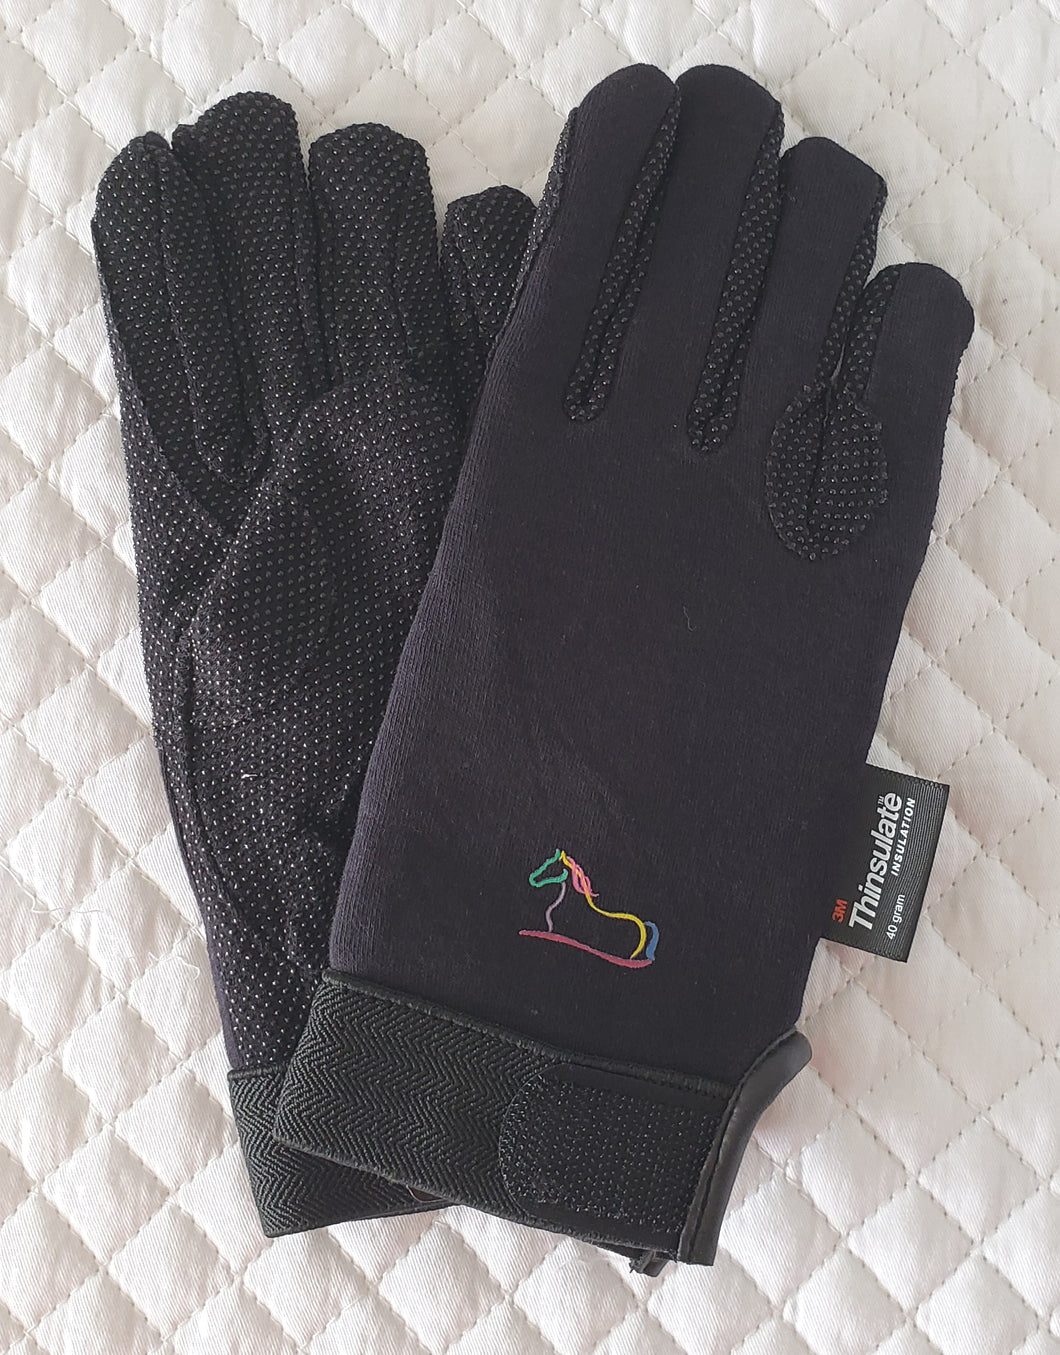 Winter Riding Gloves with Grip Palm